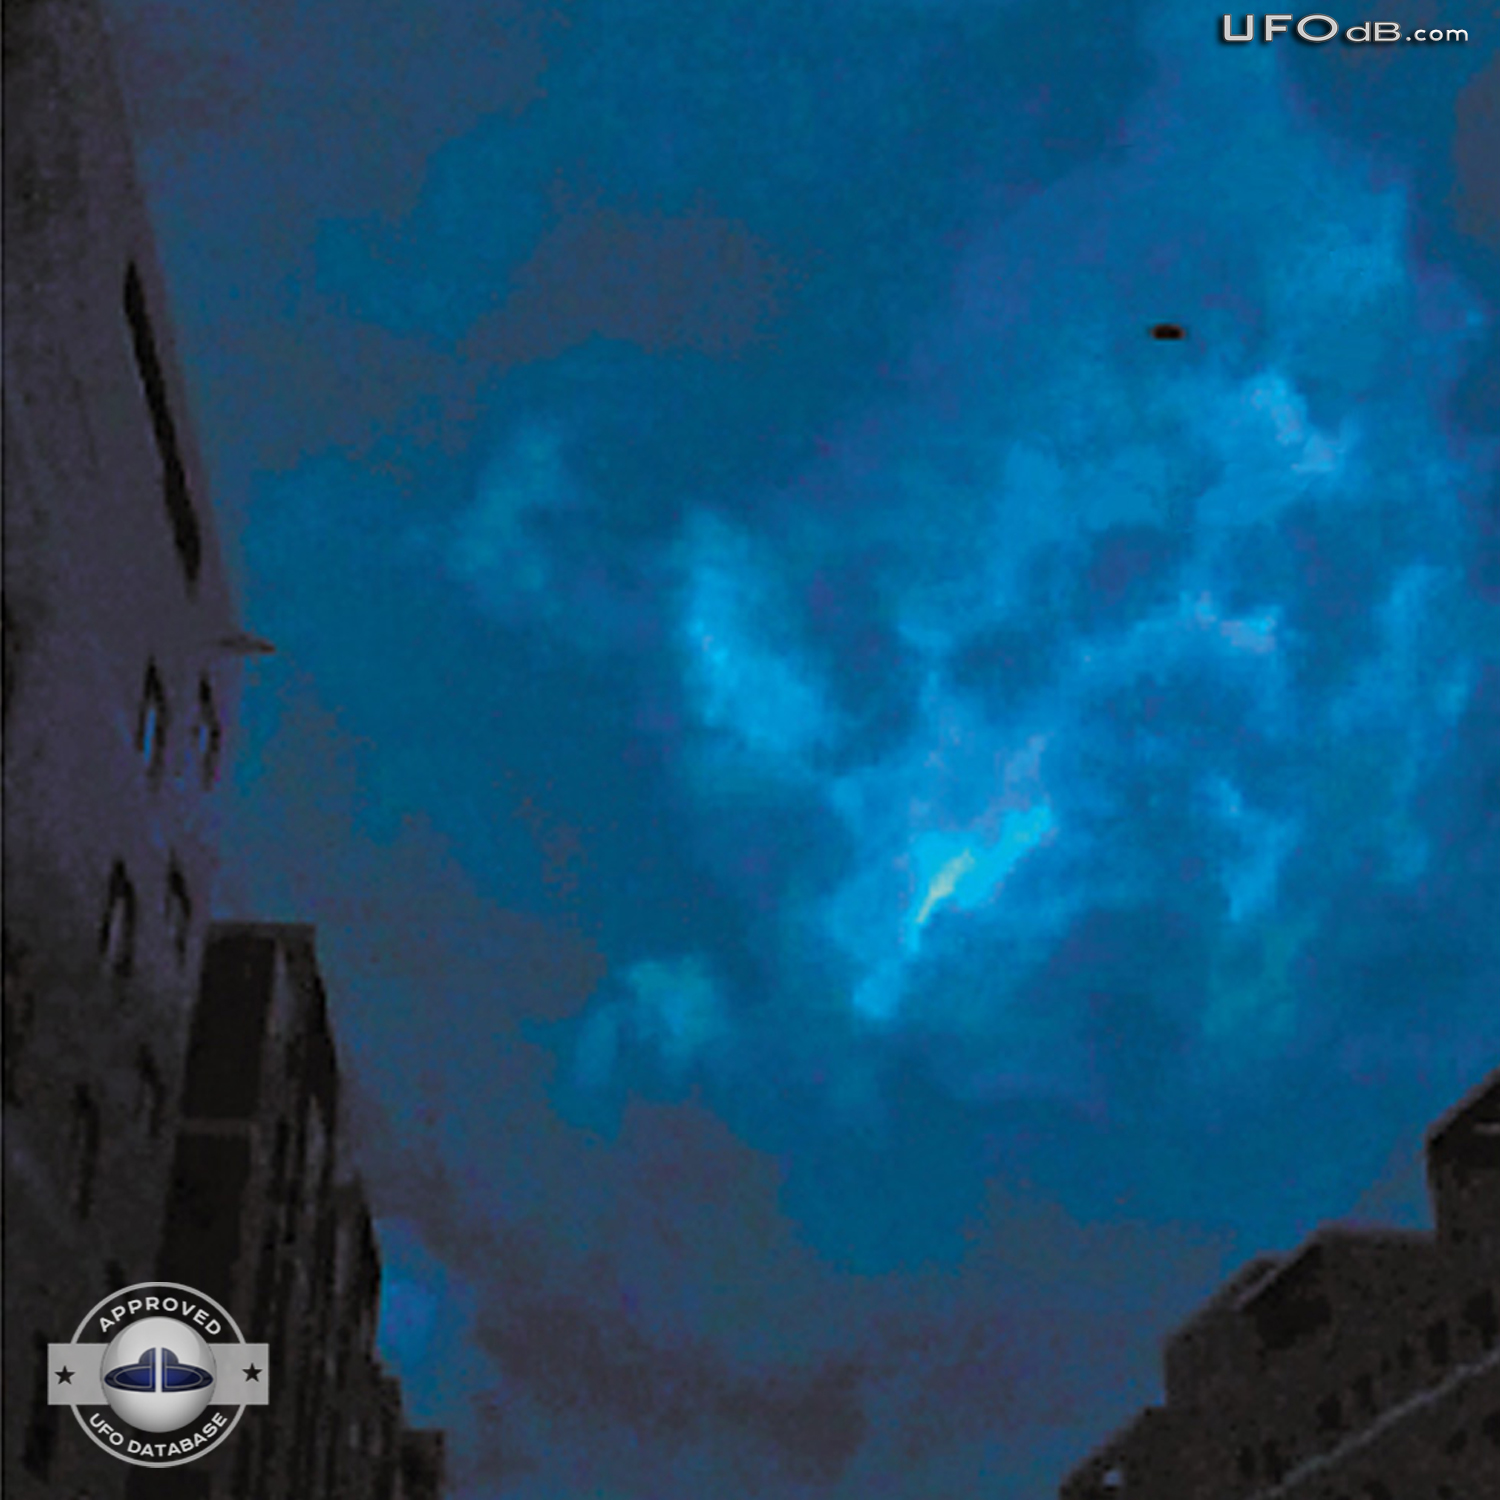 Dongguan Students get controversial UFO picture | China | May 11 2011 UFO Picture #289-2